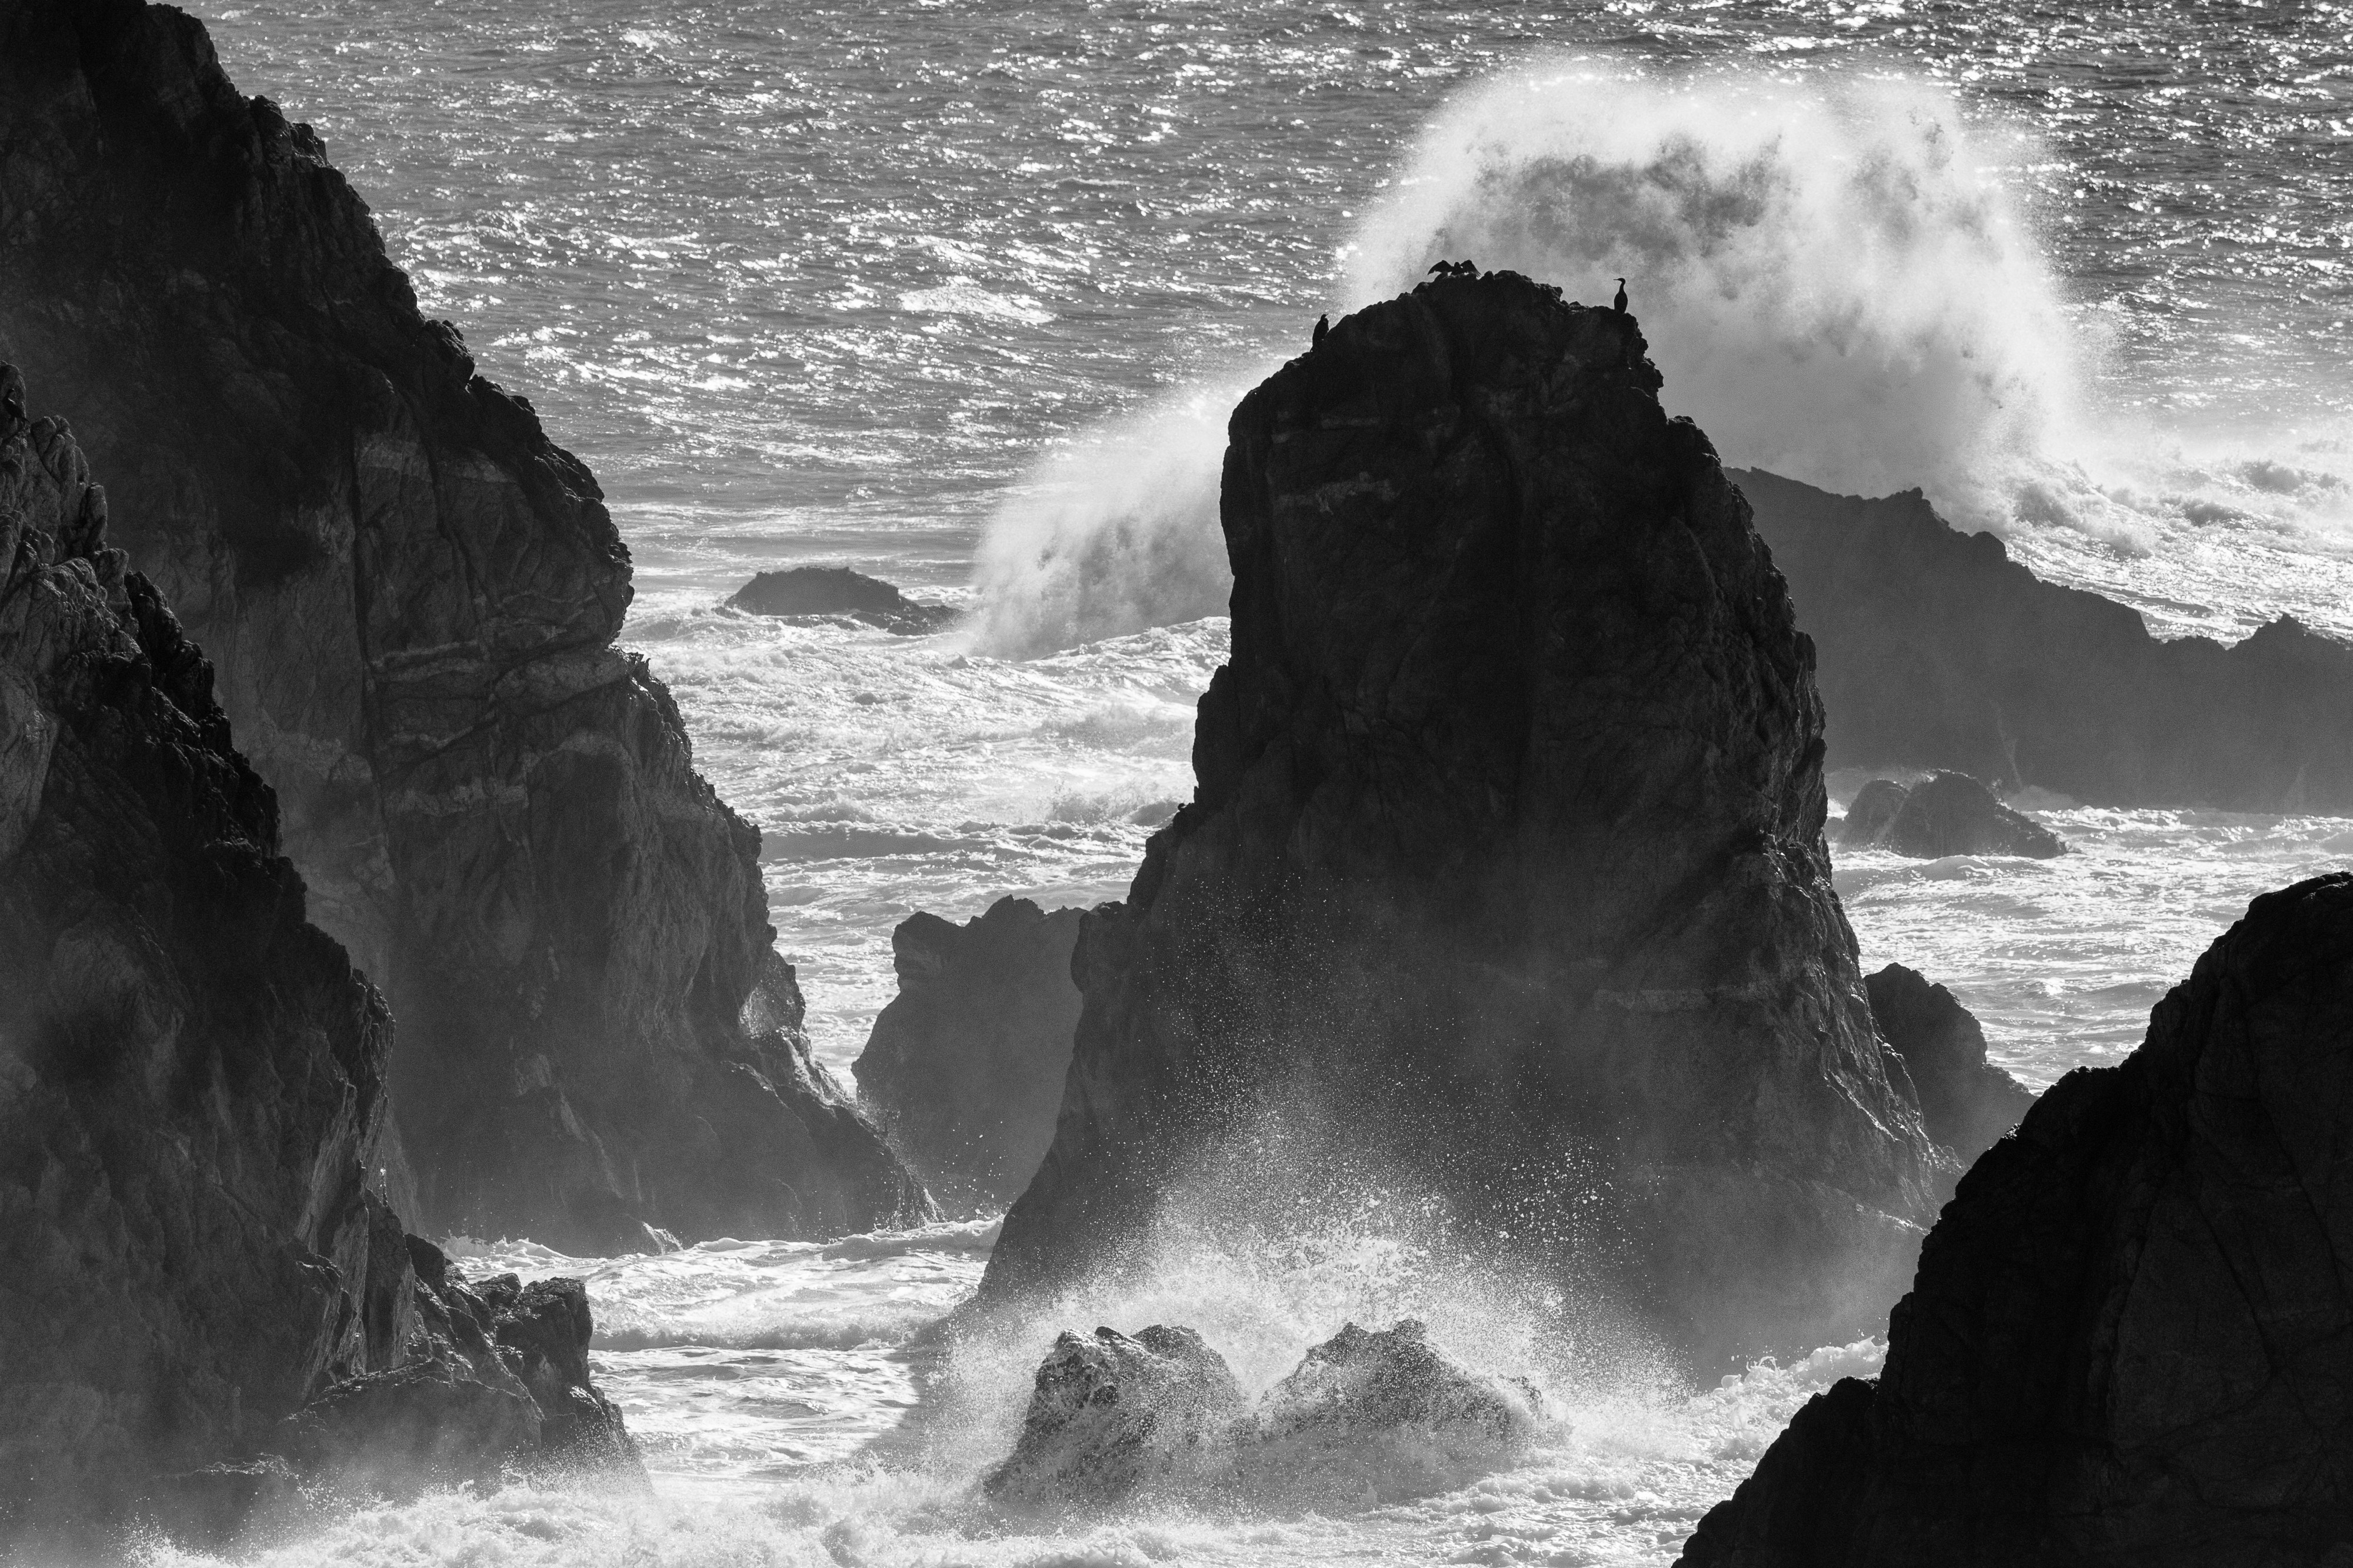 Rocks and surf at the Pacific Coast in Northern California